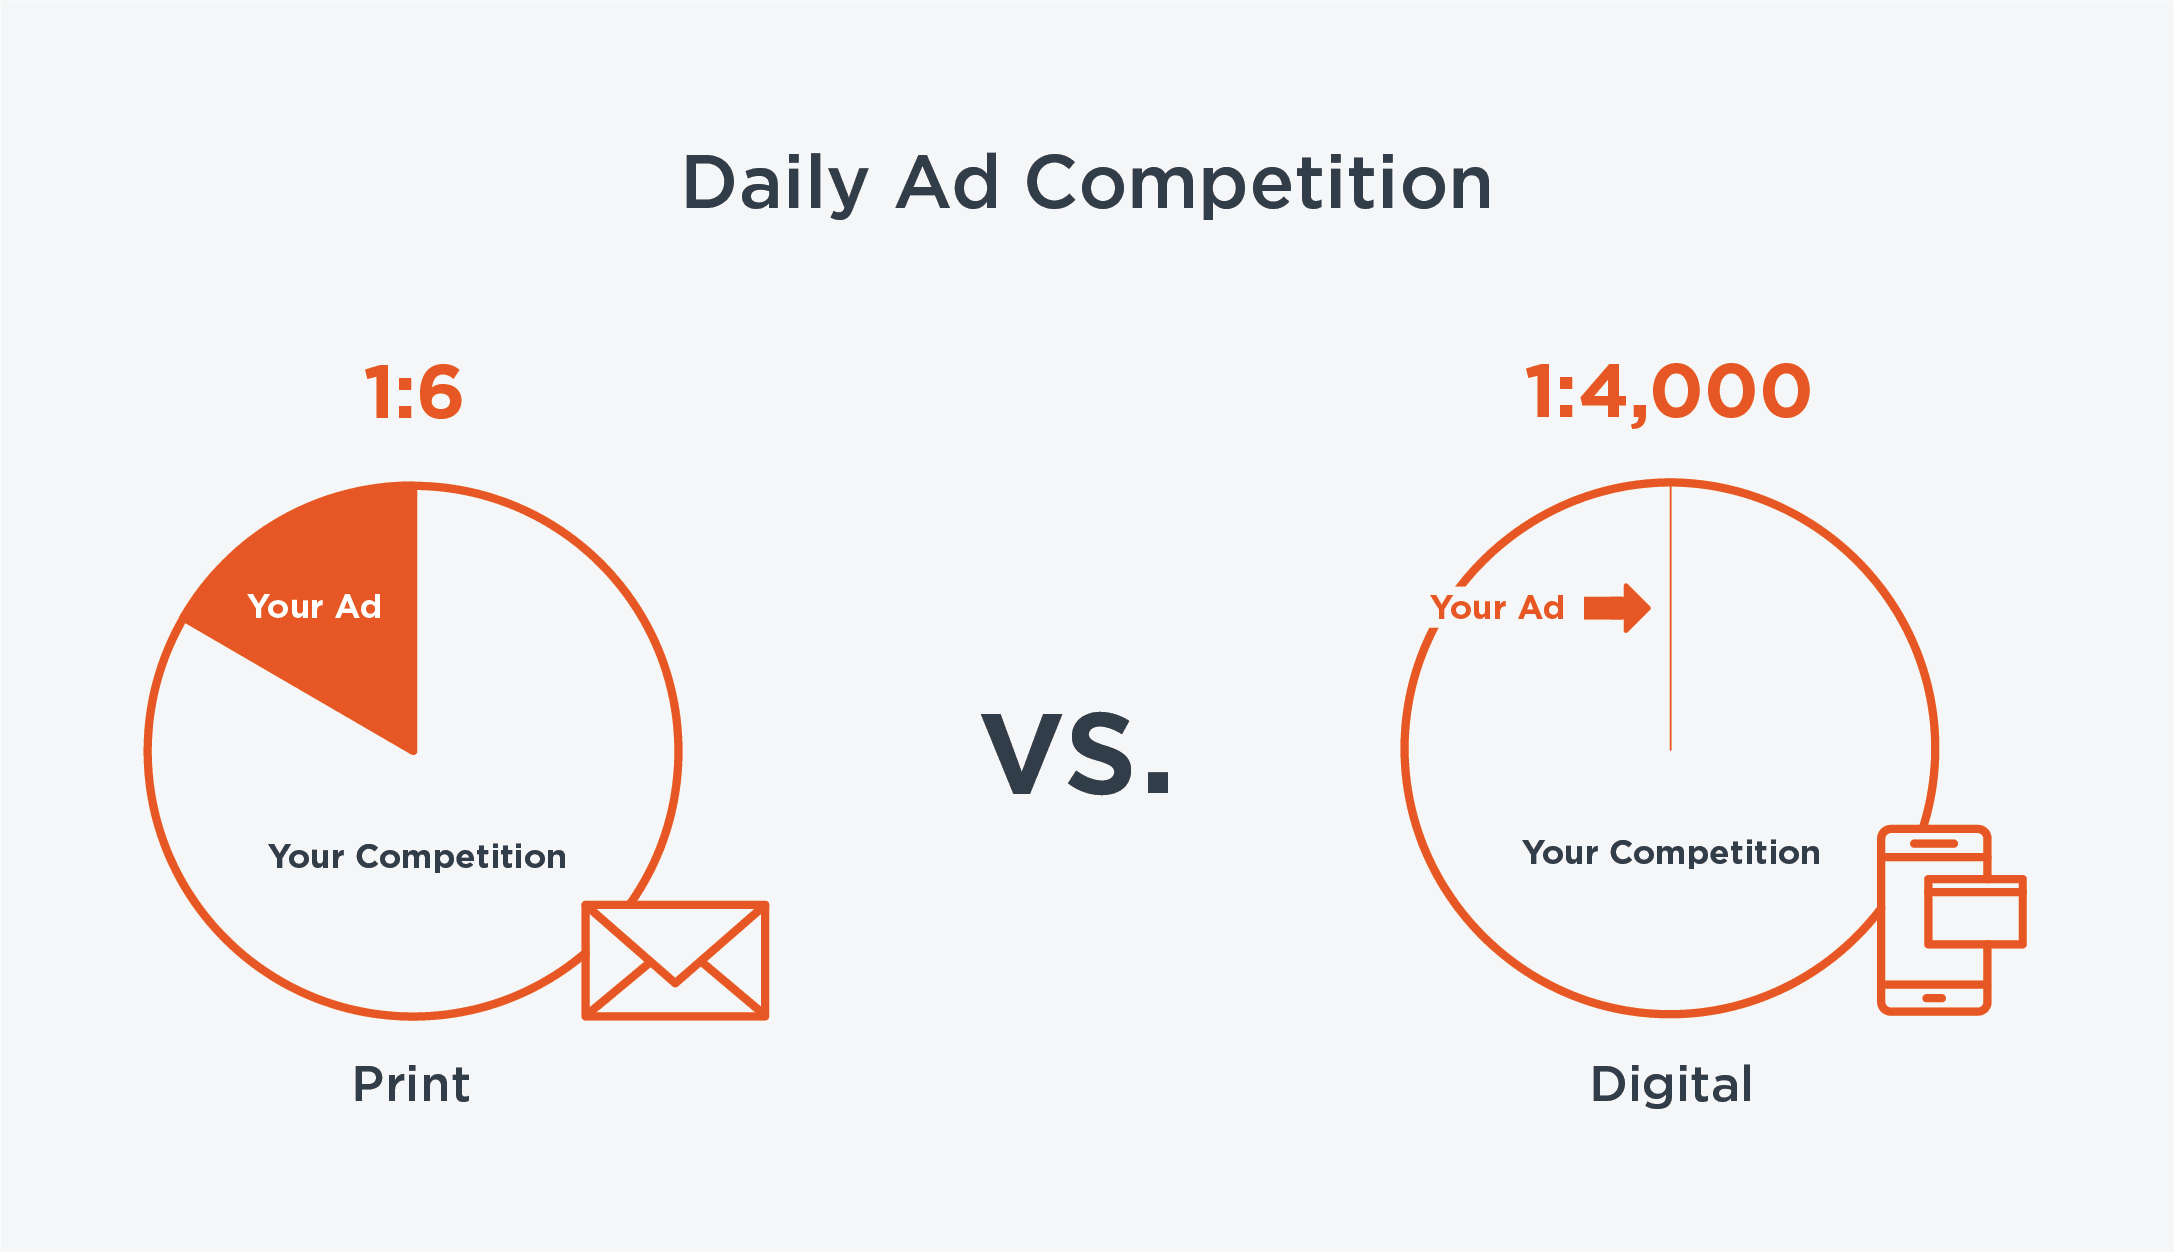 graphic showing low ad competition for mail and very high competition for digital ads